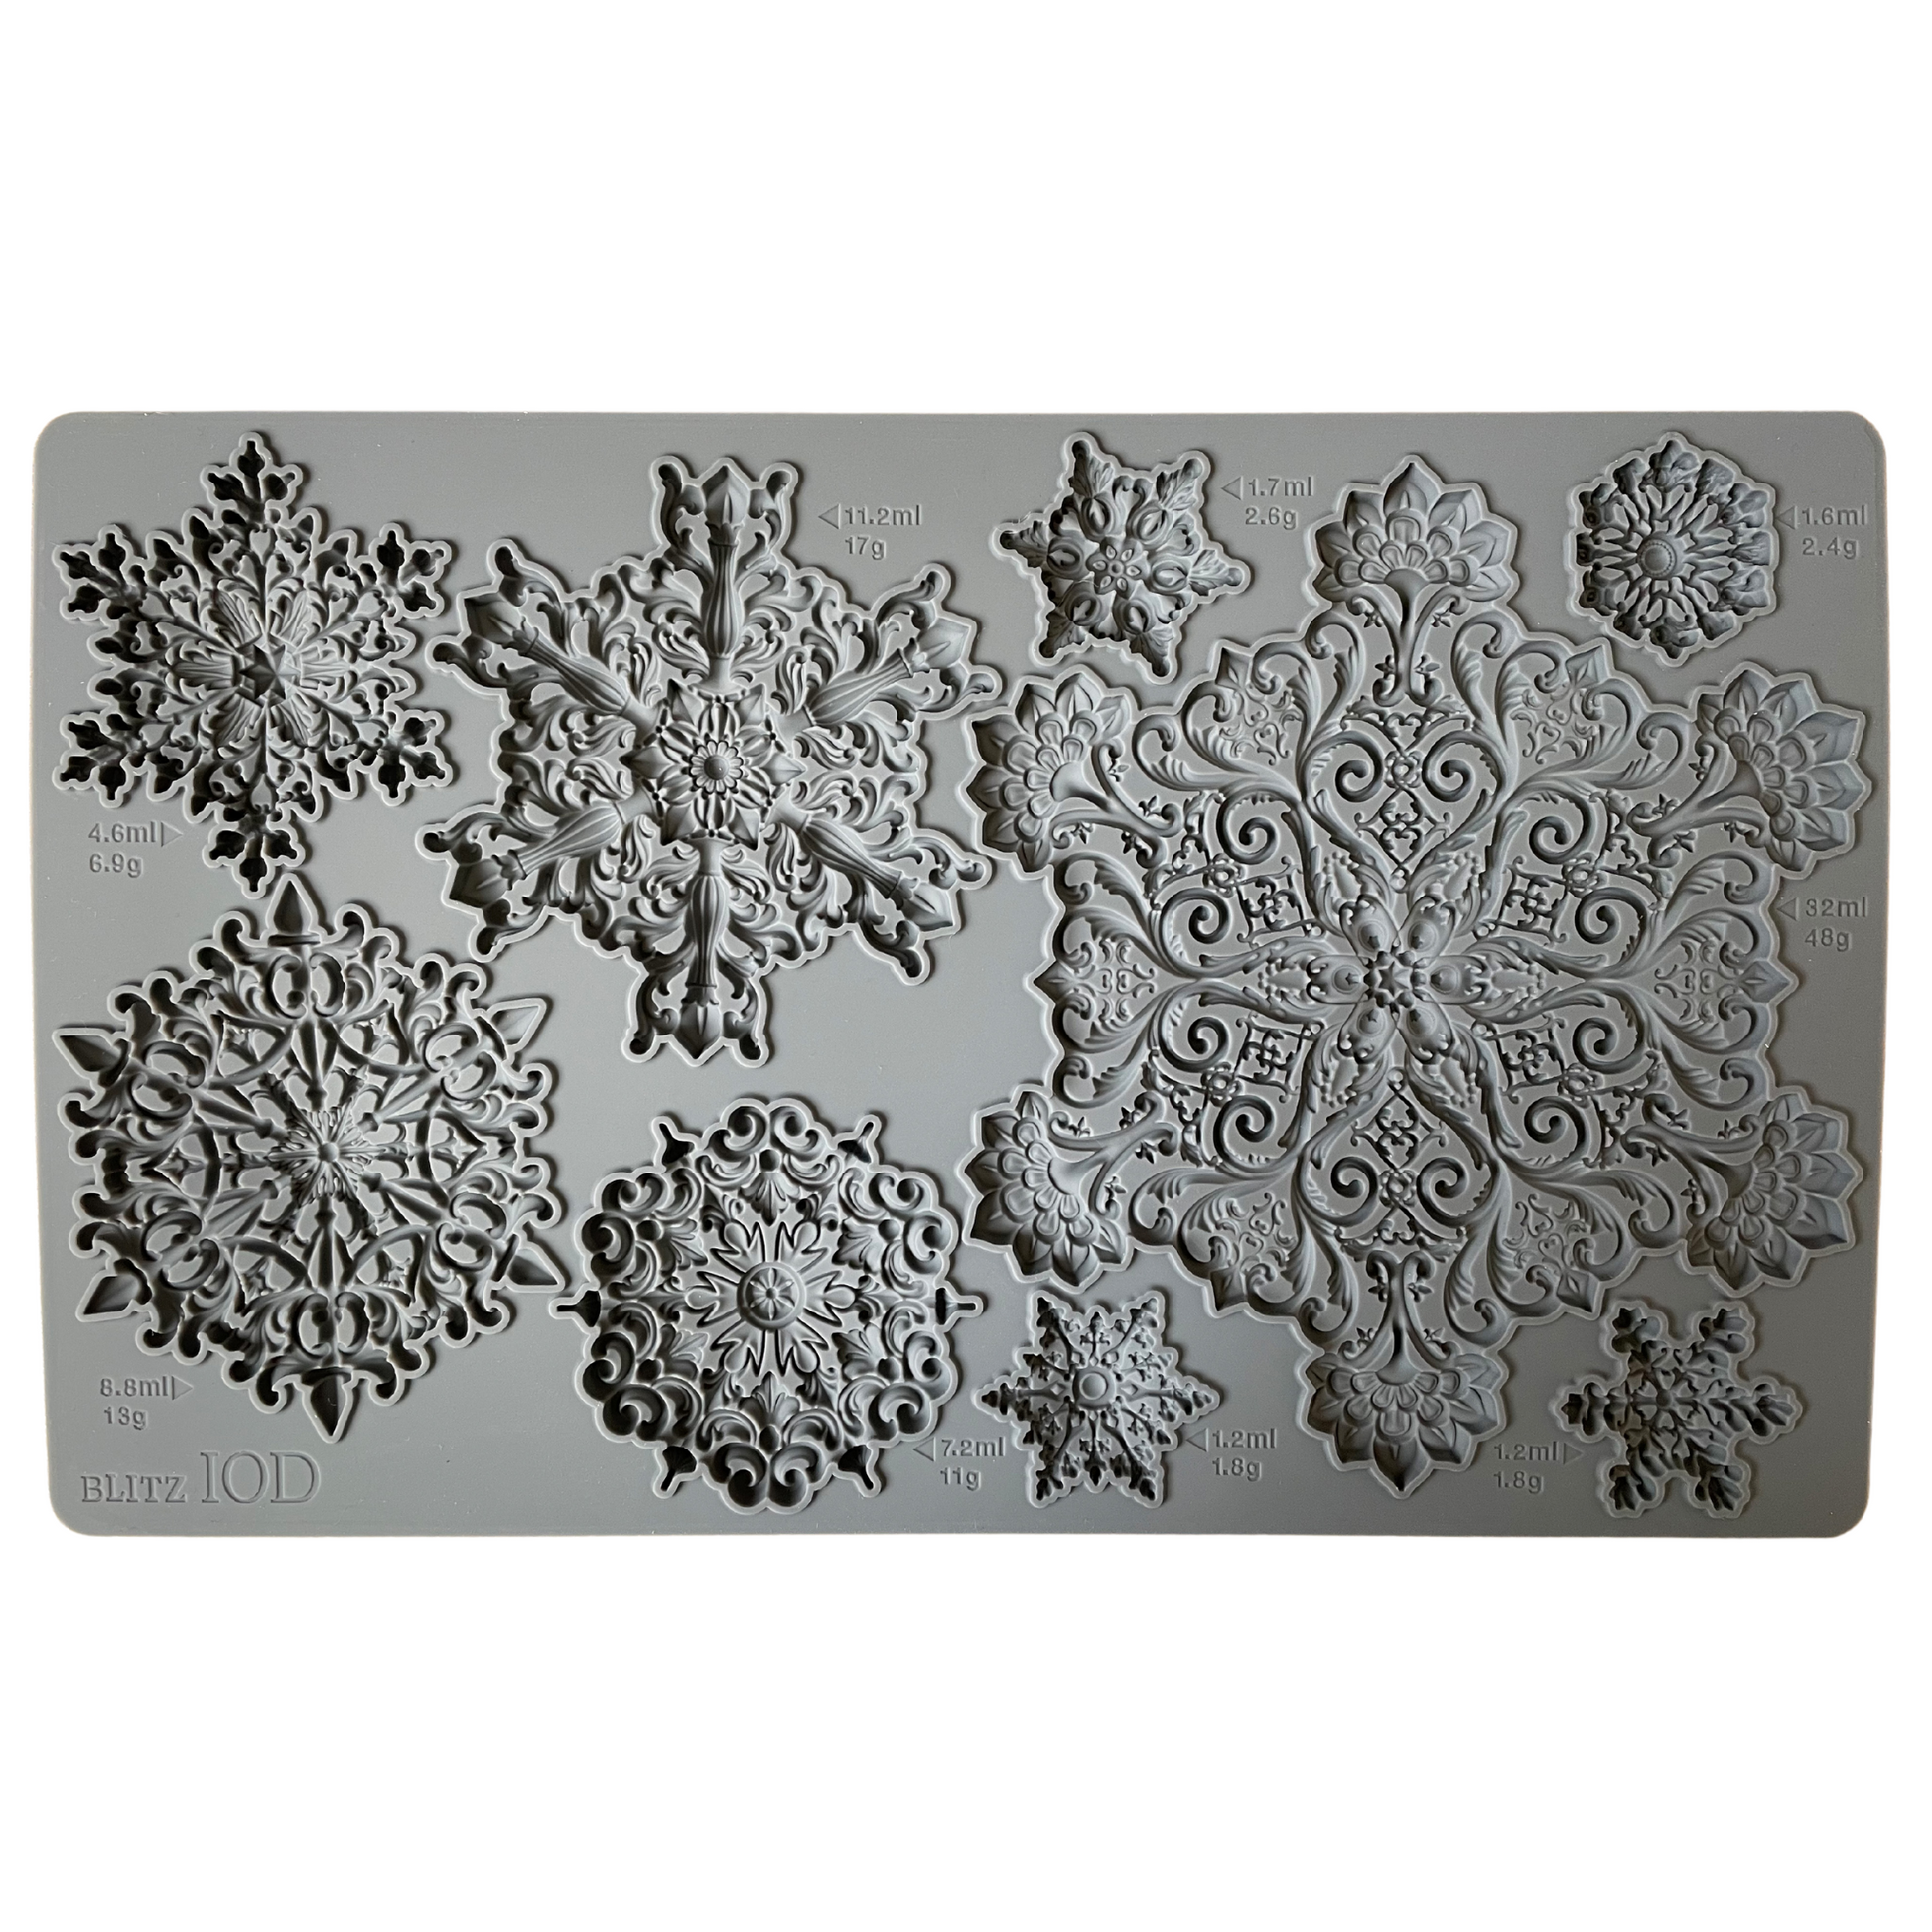 "Blitz" IOD silicone snowflake mold by Iron Orchid Designs. available at Milton's Daughter